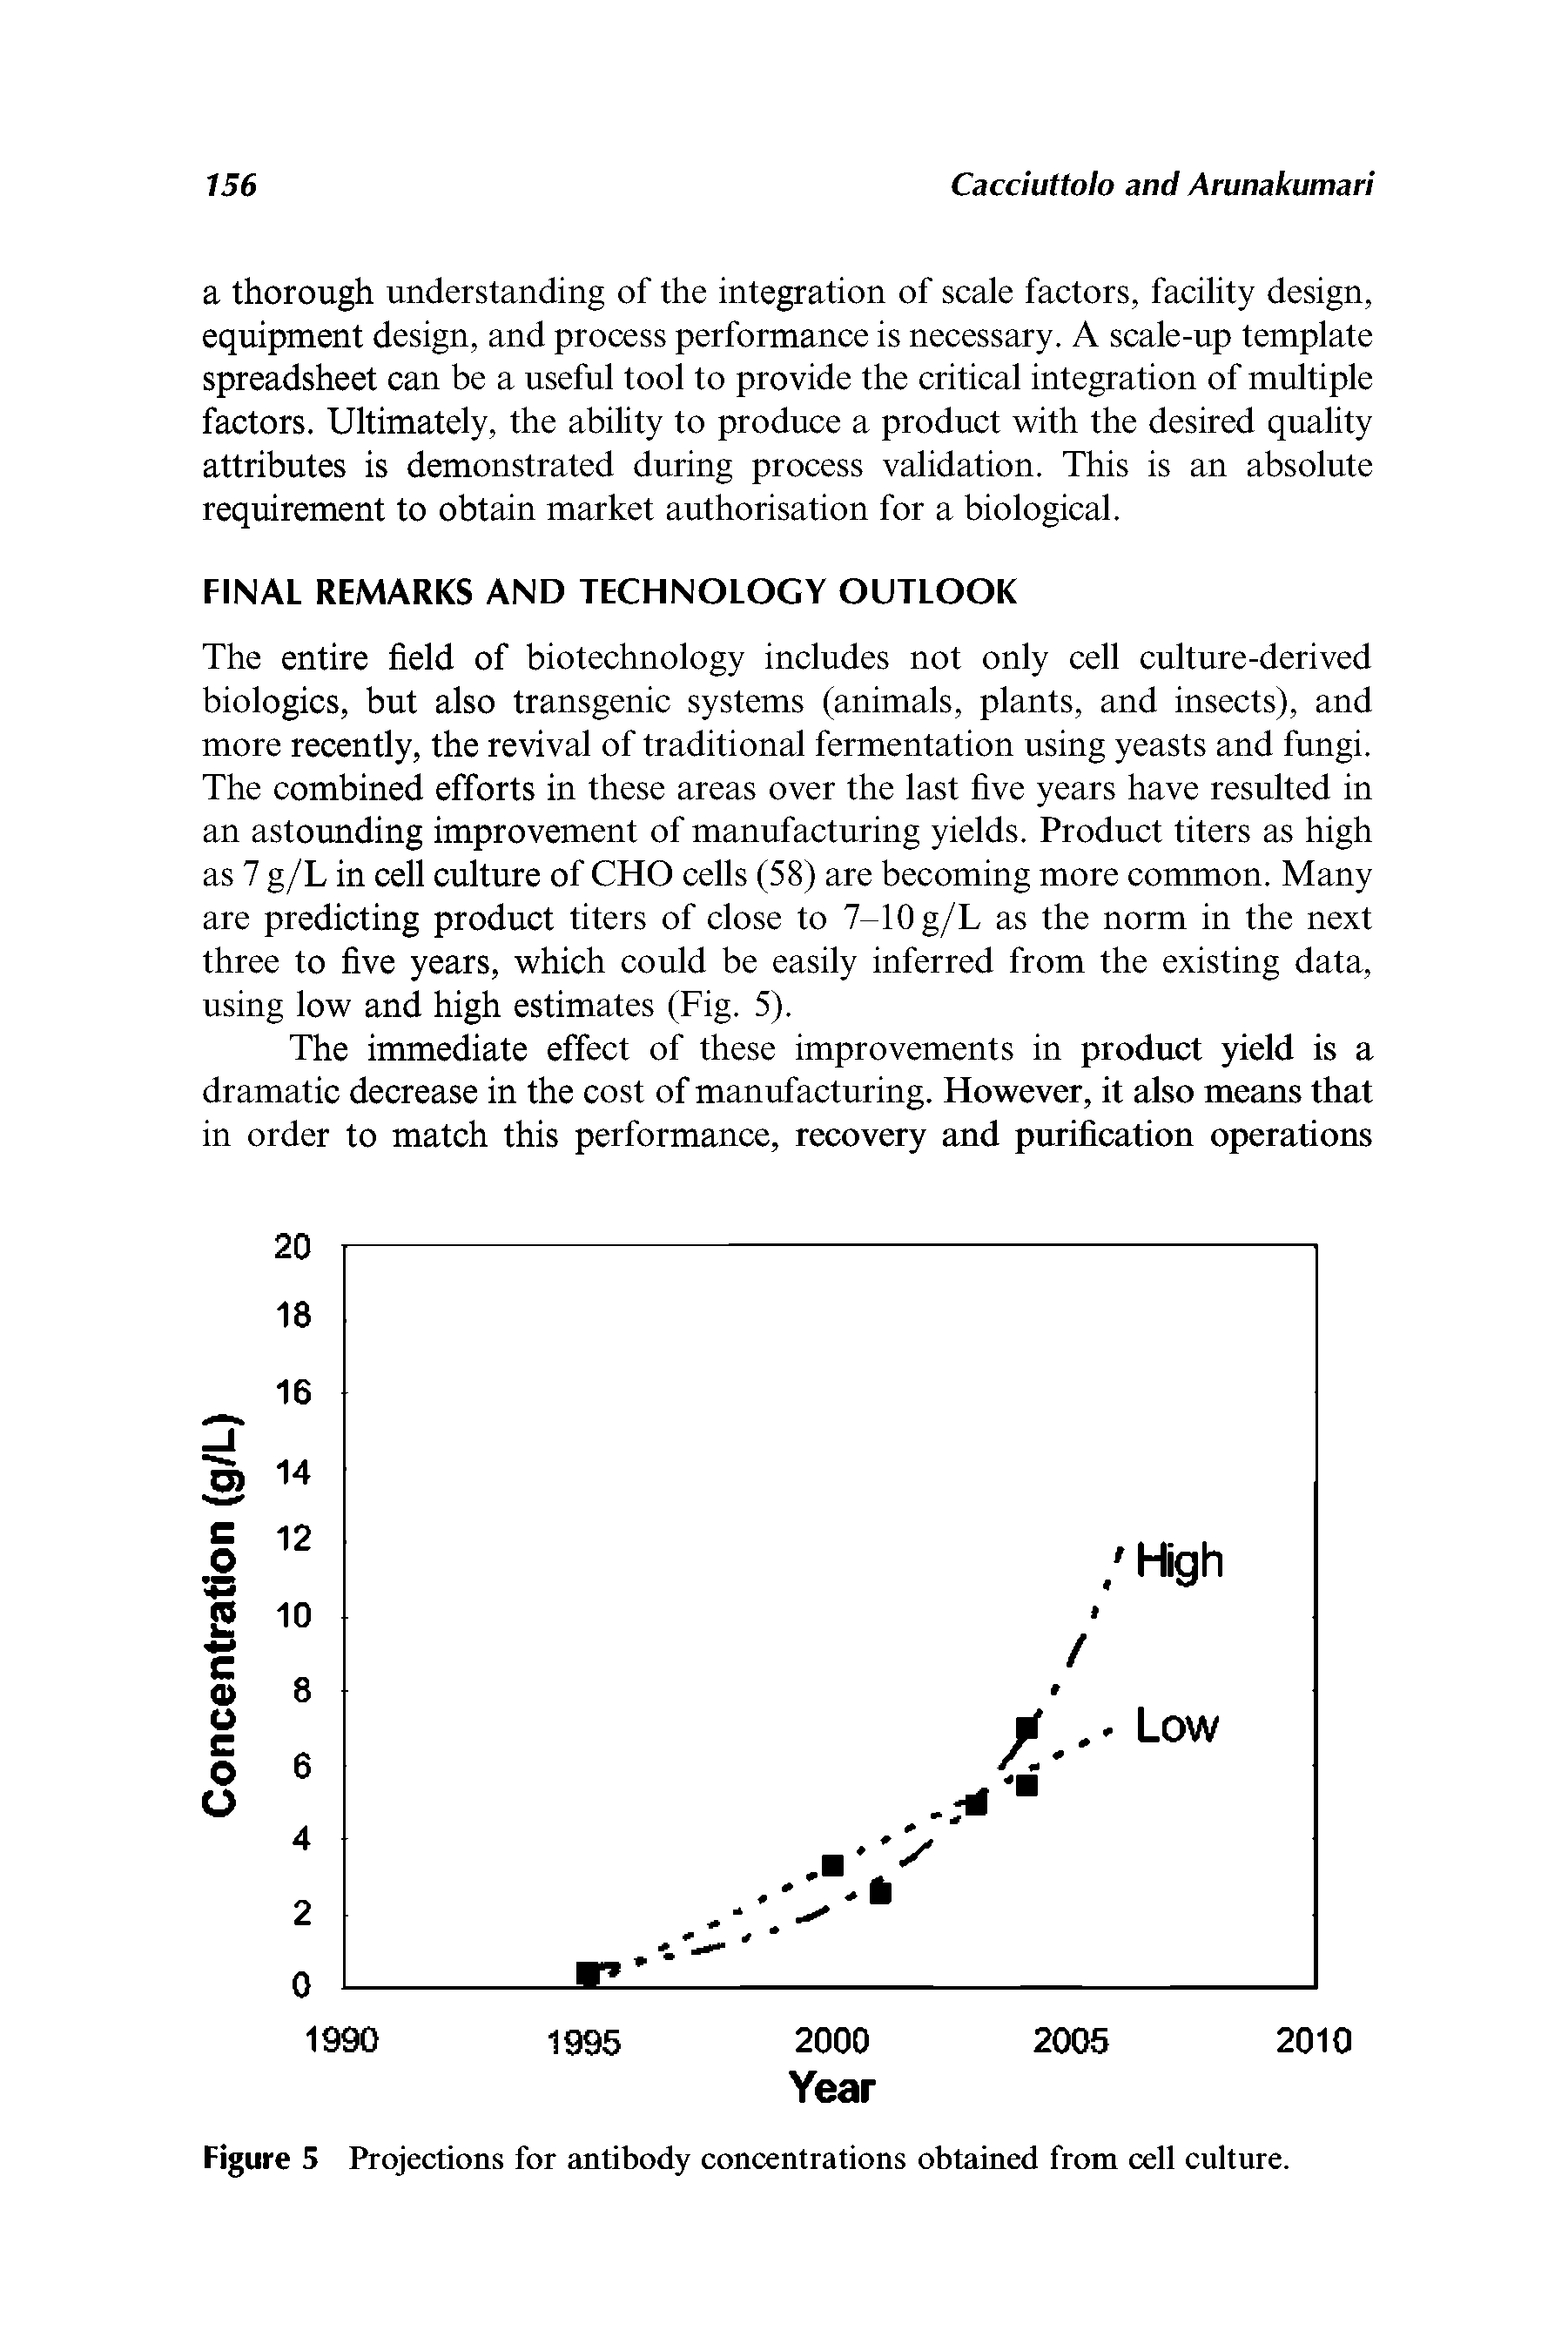 Figure S Projections for antibody concentrations obtained from cell culture.